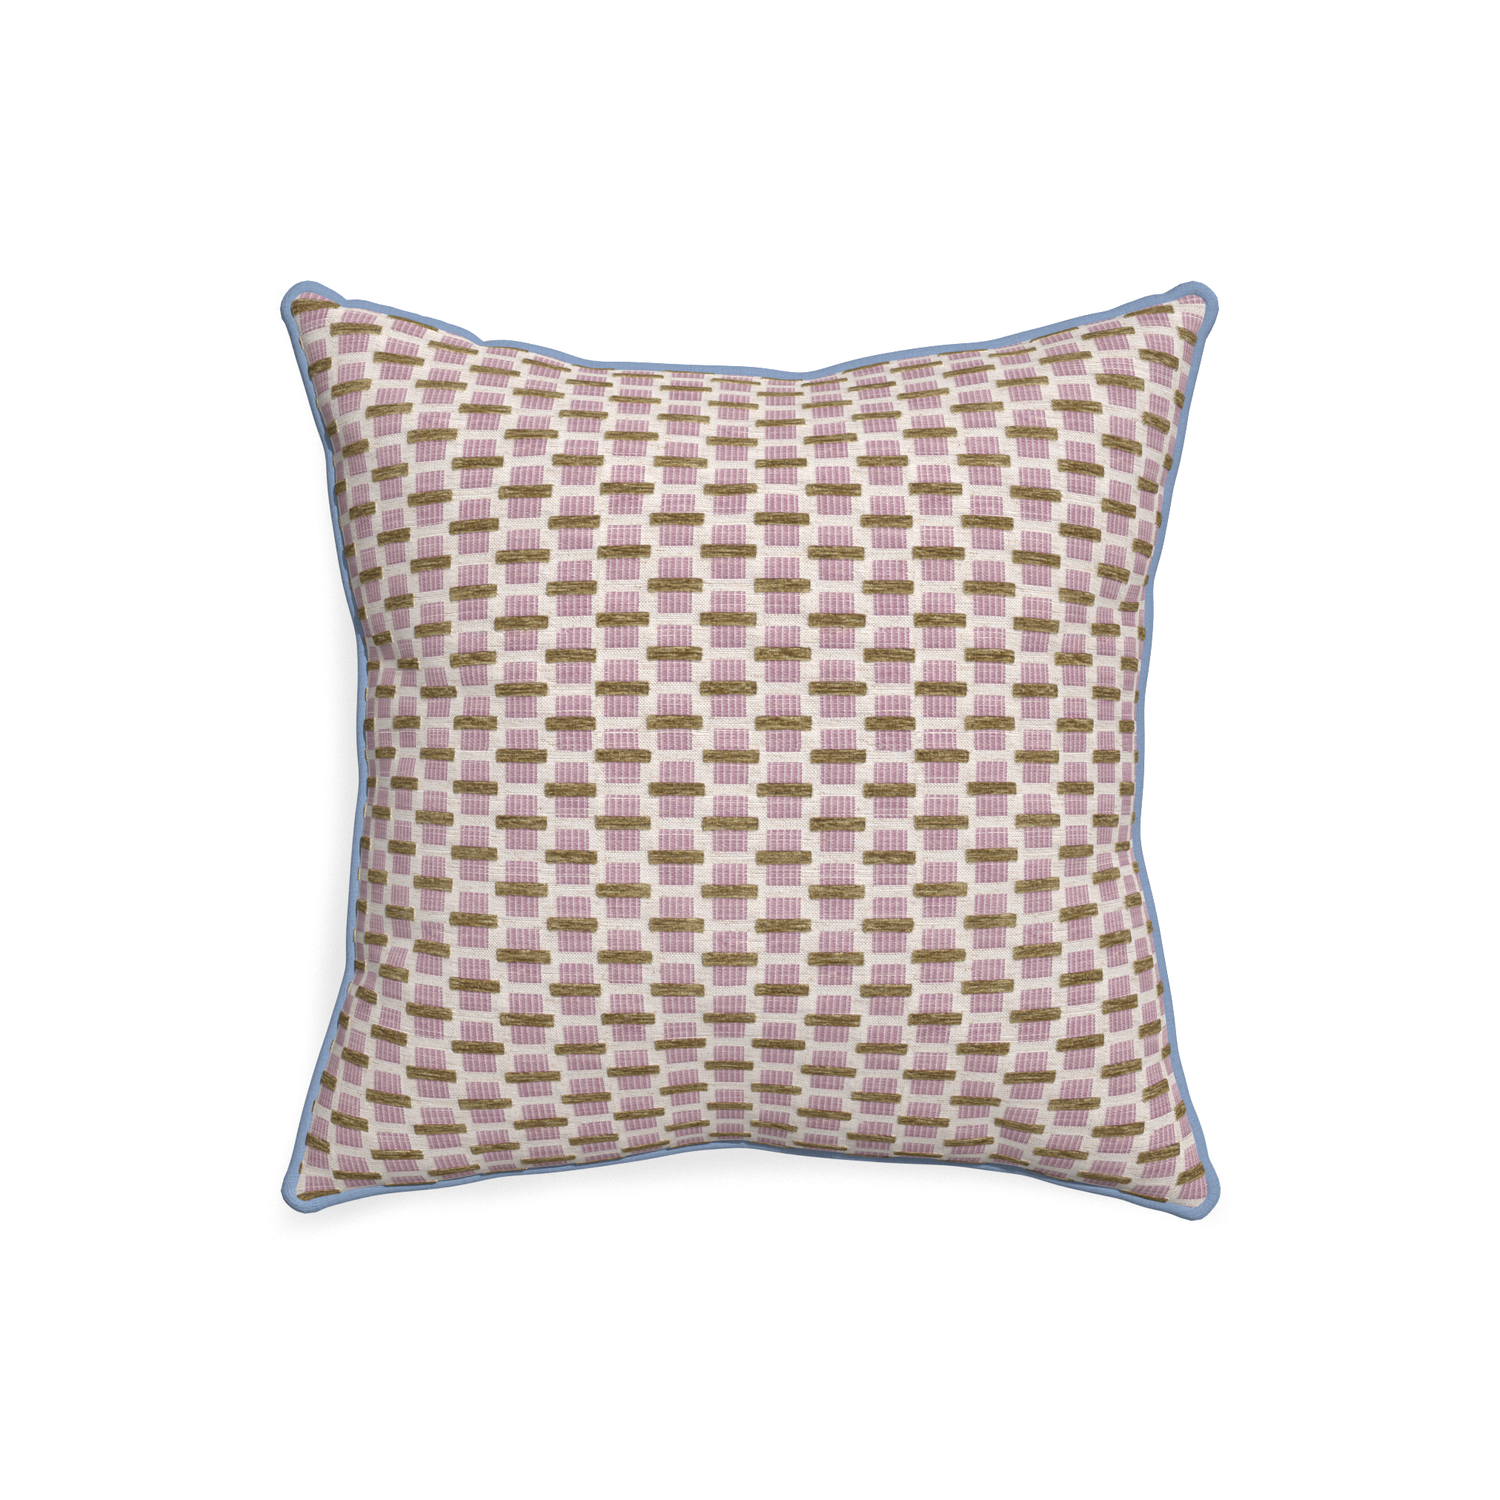 20-square willow orchid custom pink geometric chenillepillow with sky piping on white background